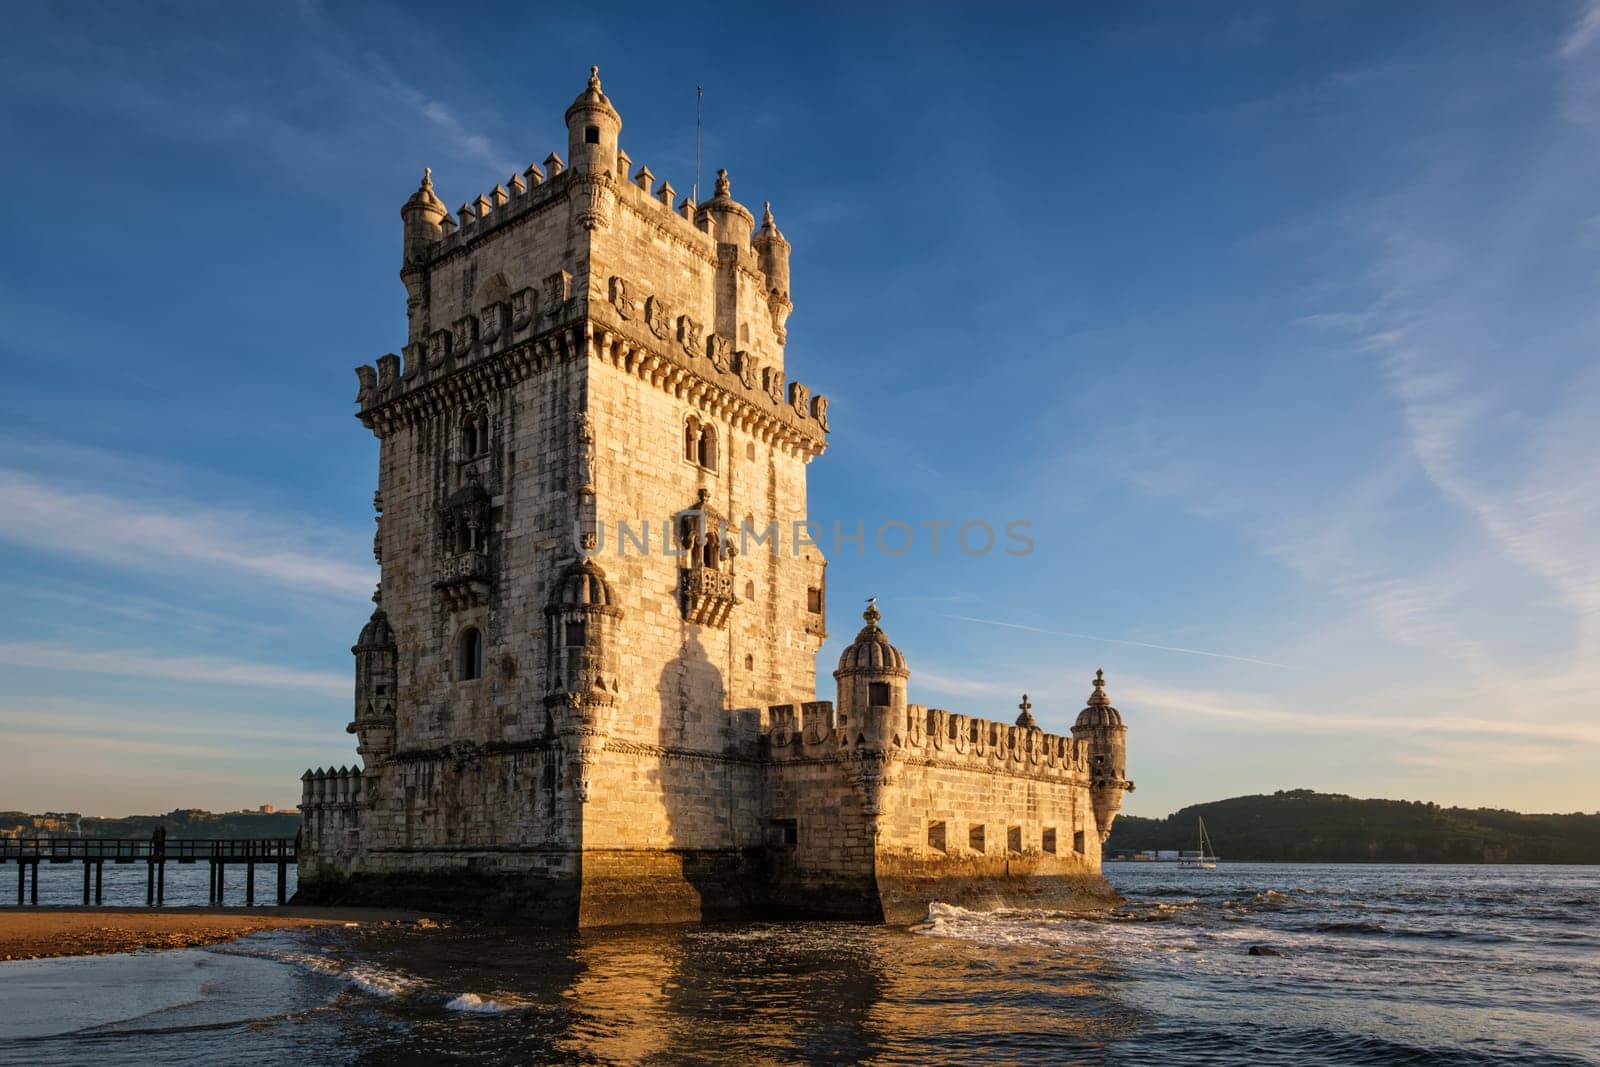 Belem Tower on the bank of the Tagus River on sunset. Lisbon, Portugal by dimol